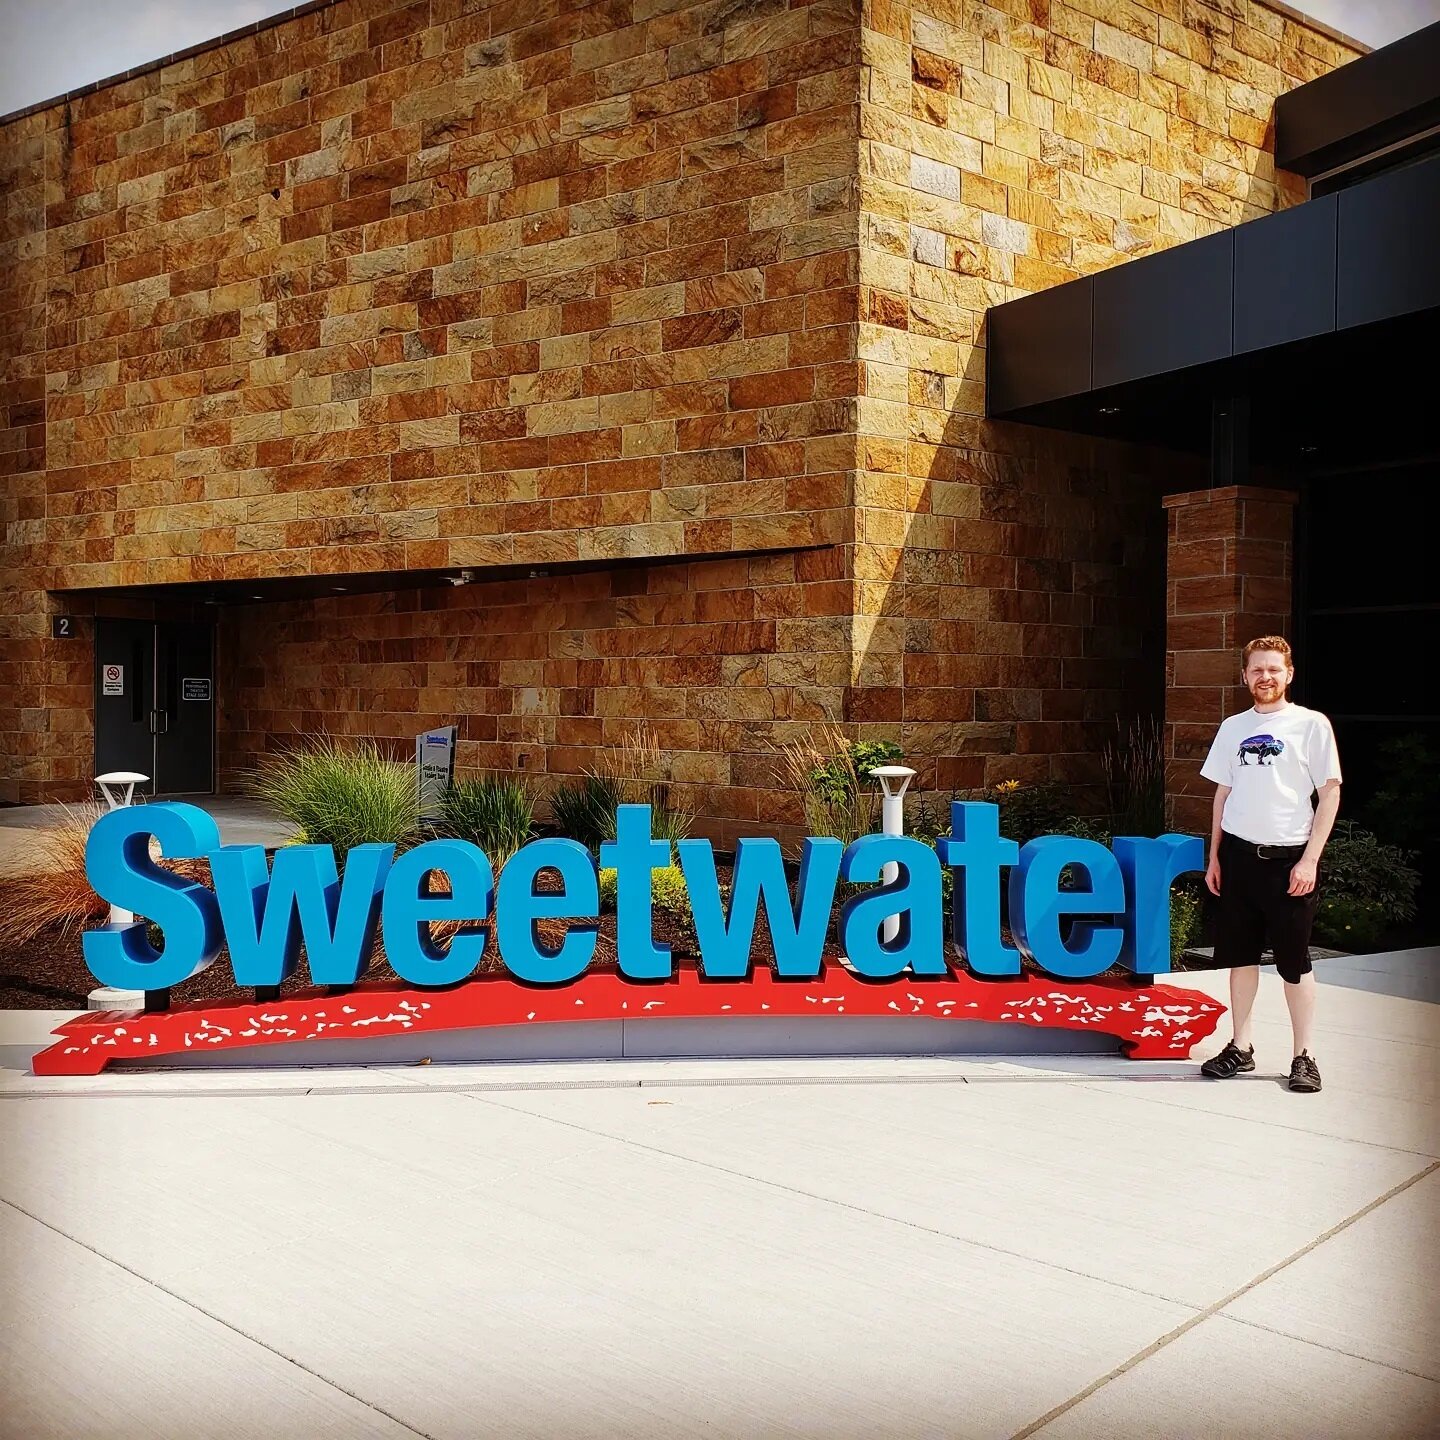 I'm standing in front of the largest music store in the world! @sweetwatersound 
What an amazing place! 
It's definitely worth a visit.

#composerslife #insperation #music #sound #sweetwatersound #sweetwater